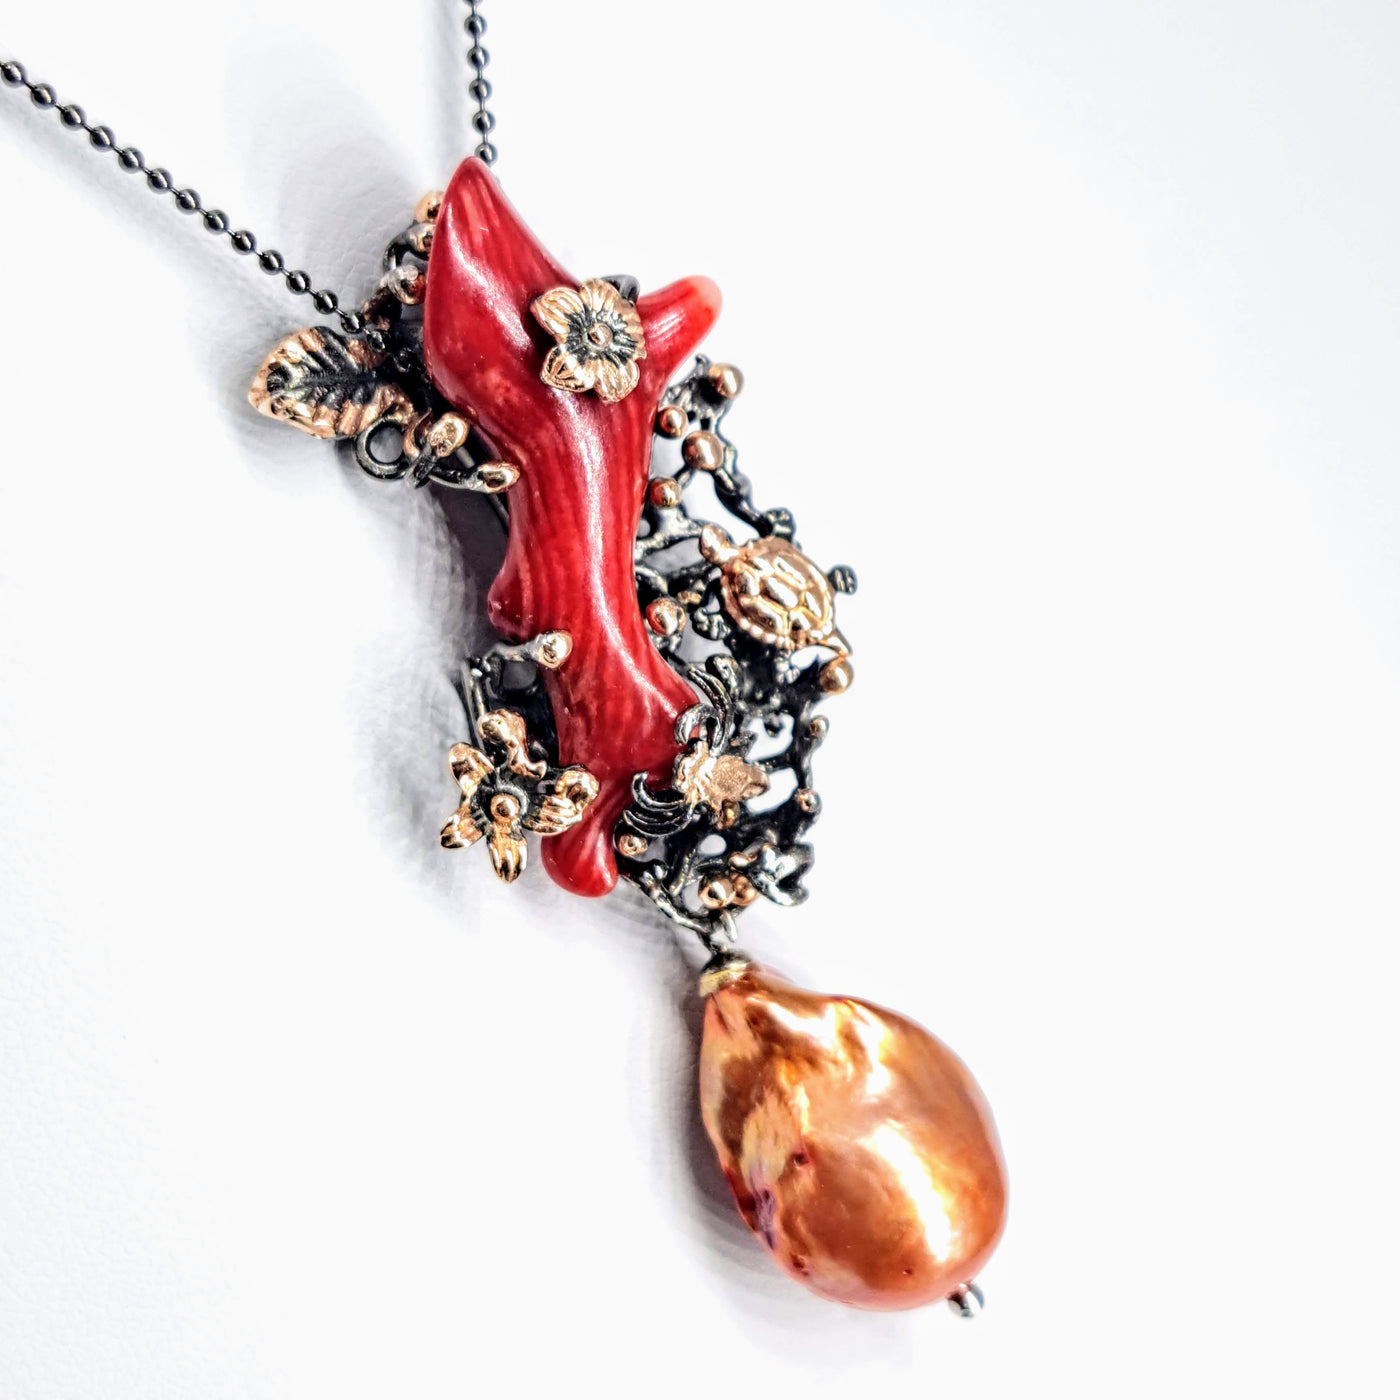 "Branchin' Out" 16"-18" Necklace by Barb - Ethical Coral Branch, Baroque Pearl, Black Sterling, Rose Gold Accents